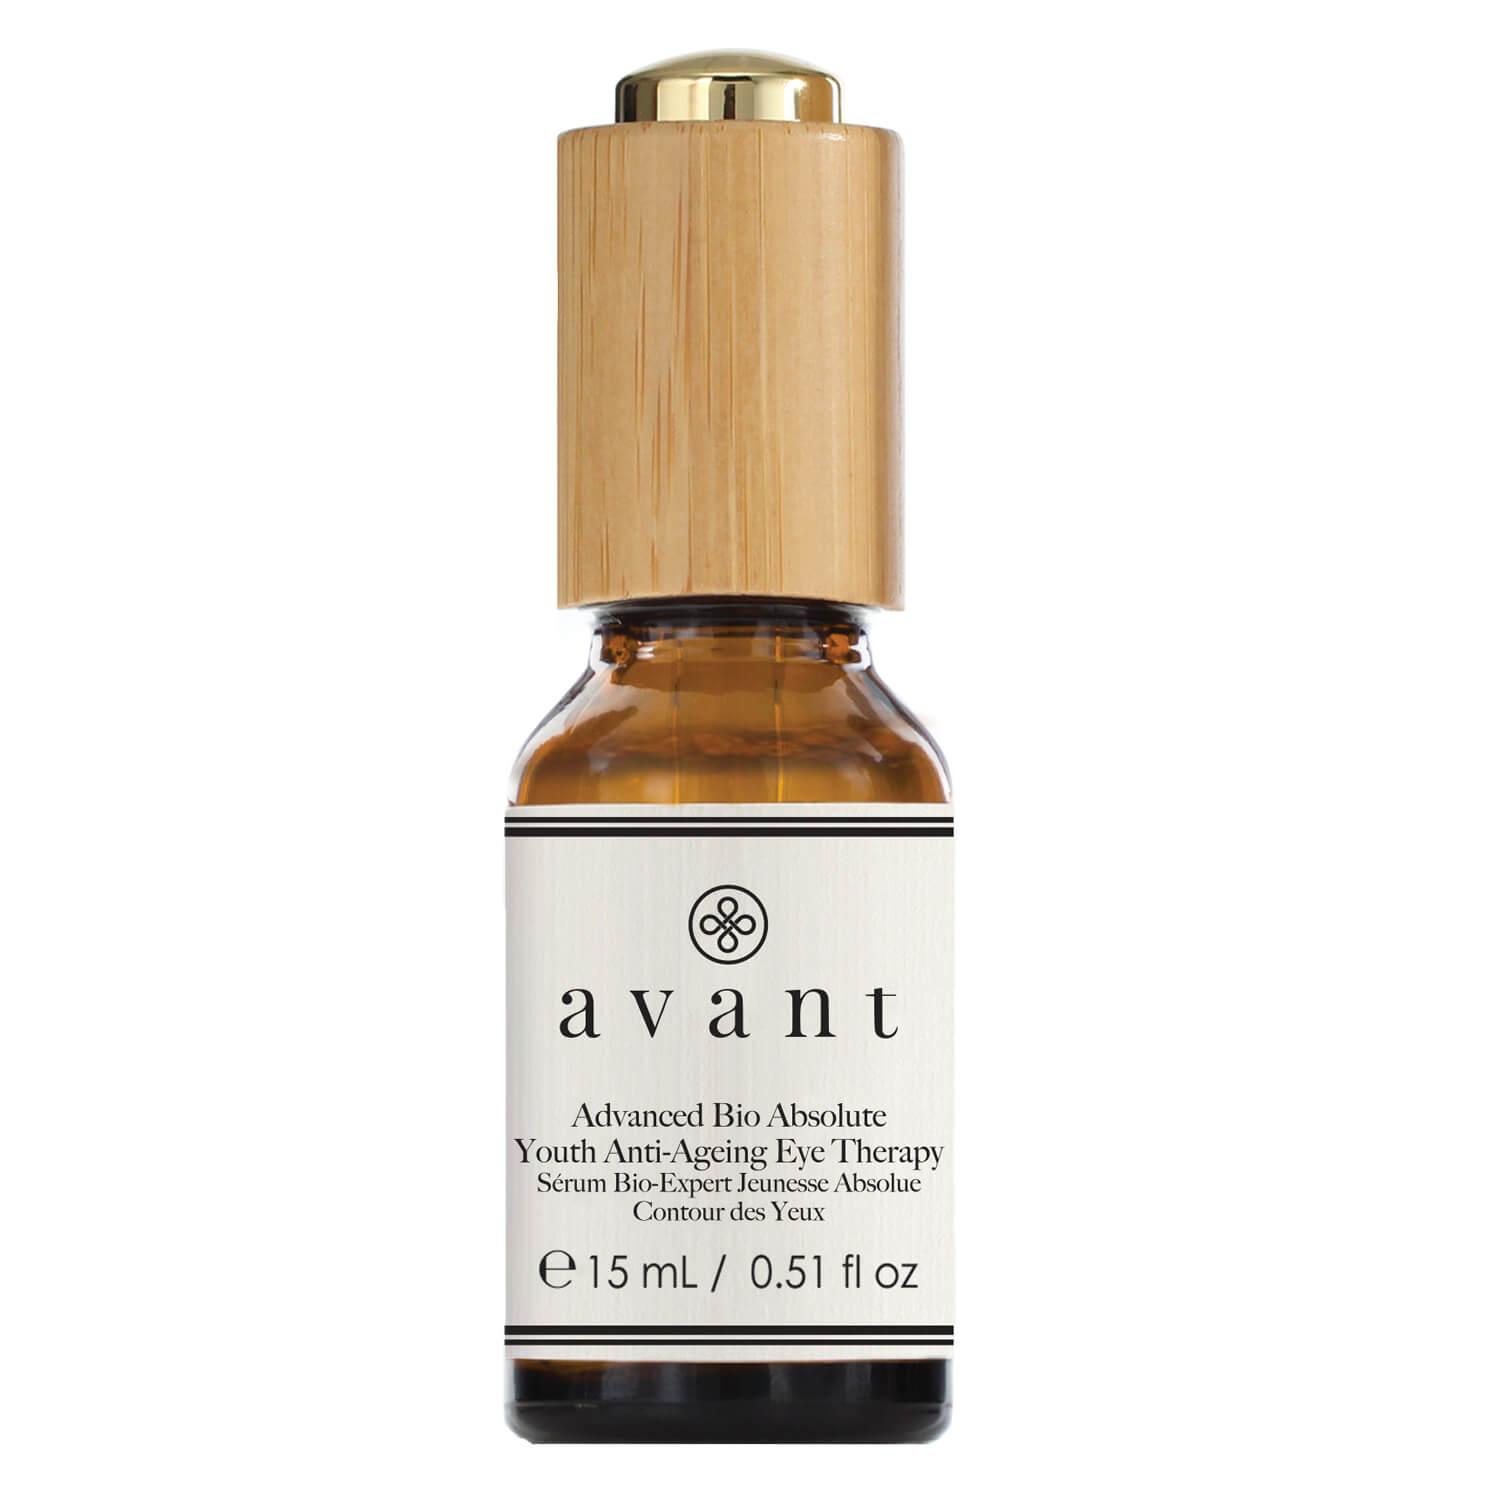 avant - Advanced Bio Absolute Youth Eye Therapy (Anti-Ageing) Limited Edition